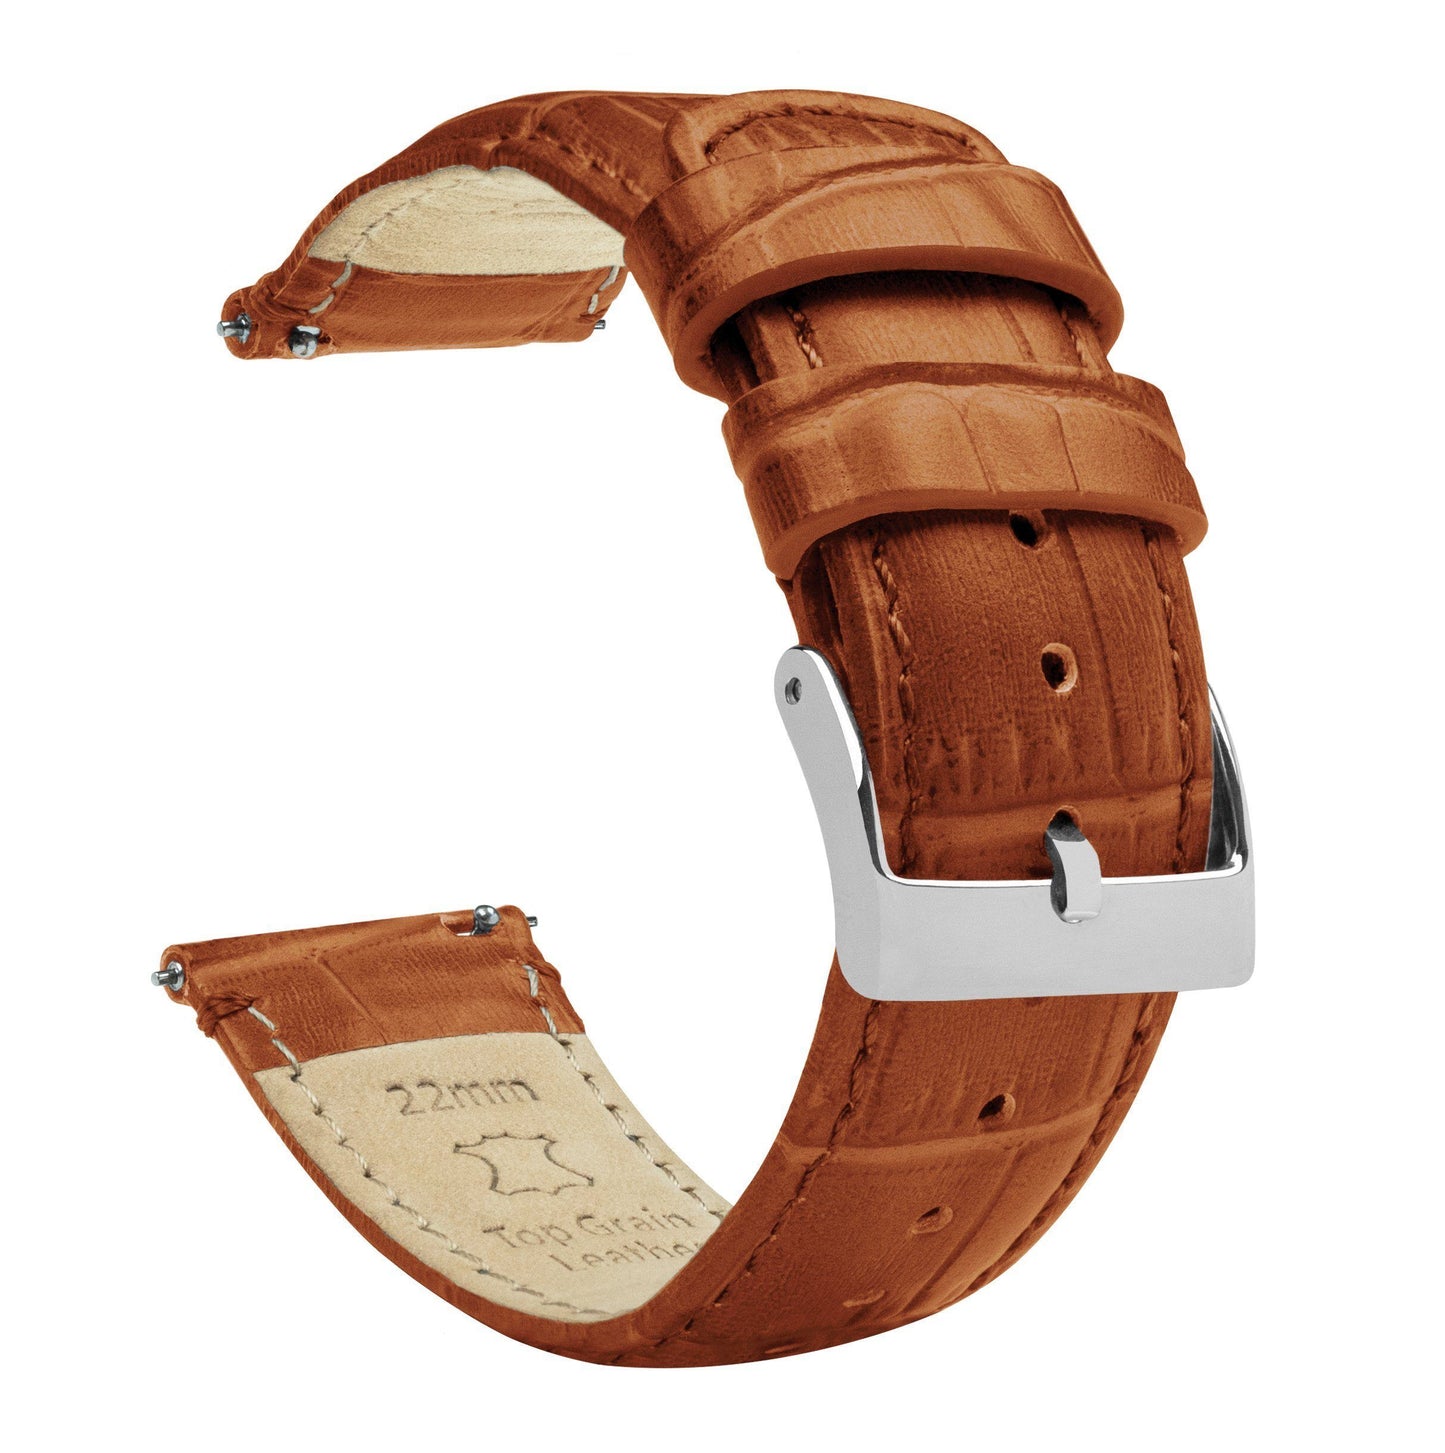 Pebble Smart Watches | Toffee Brown Alligator Grain Leather - Barton Watch Bands